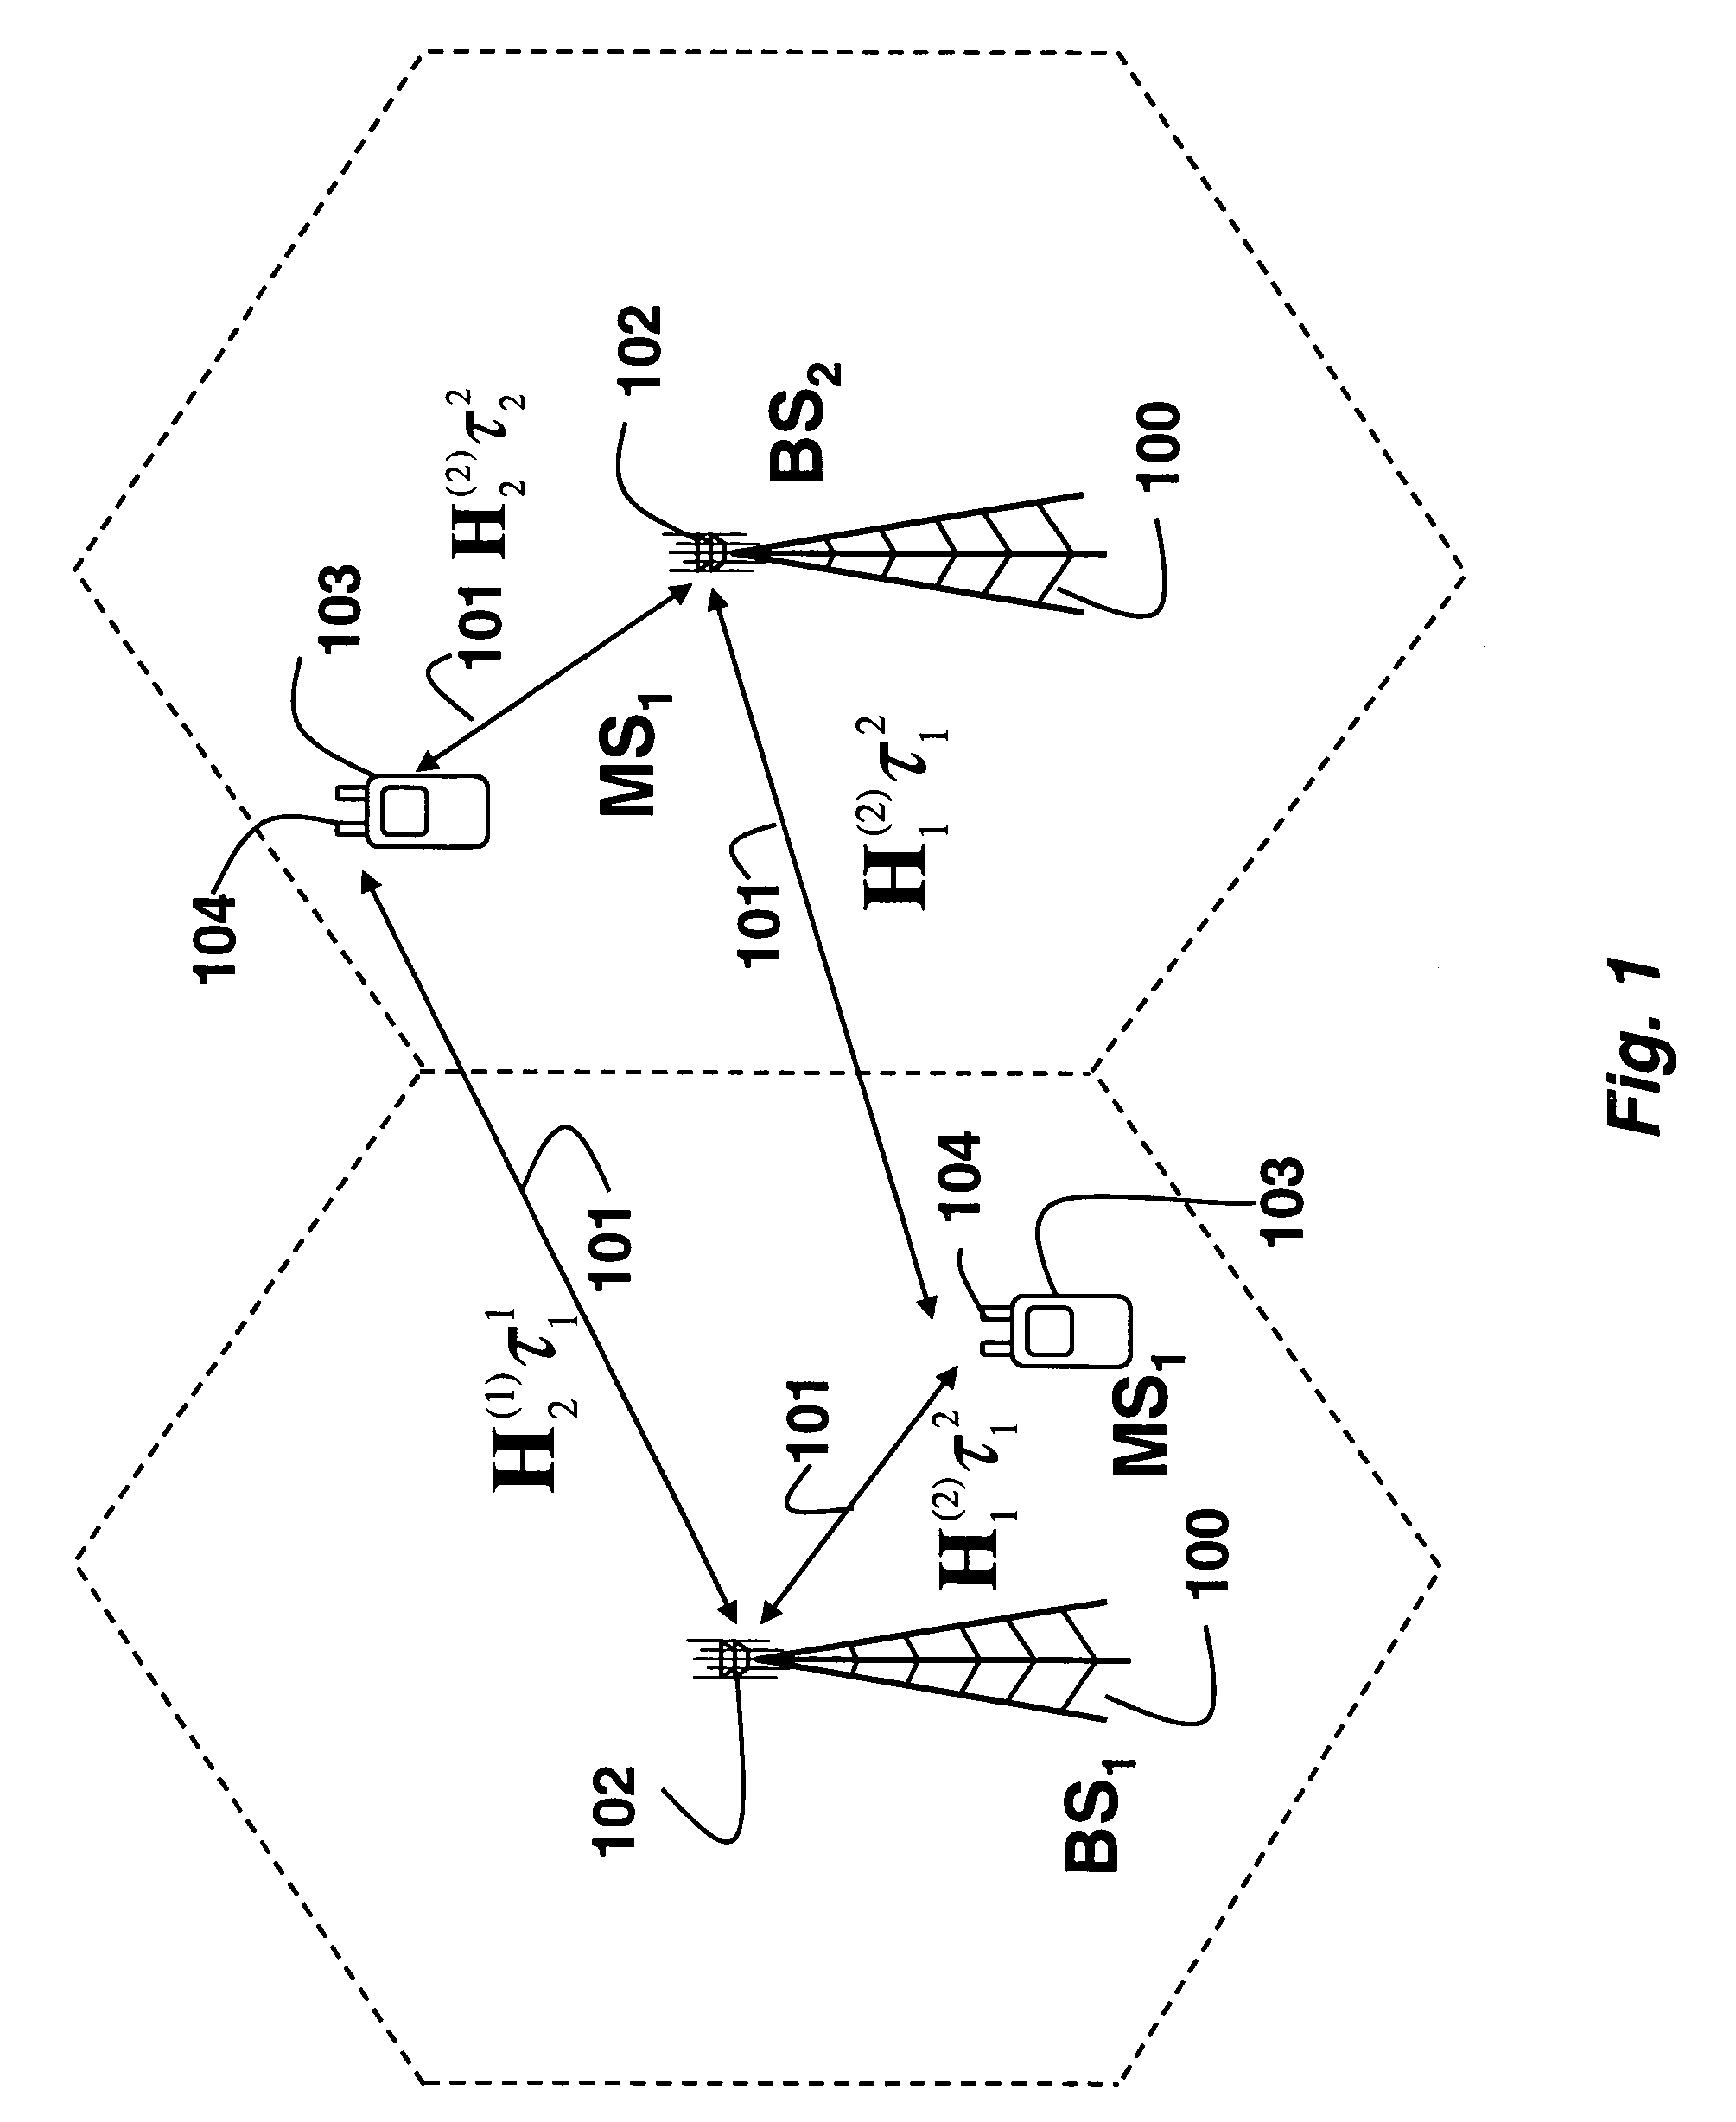 System and method for transmitting signals in cooperative base station multi-user MIMO networks